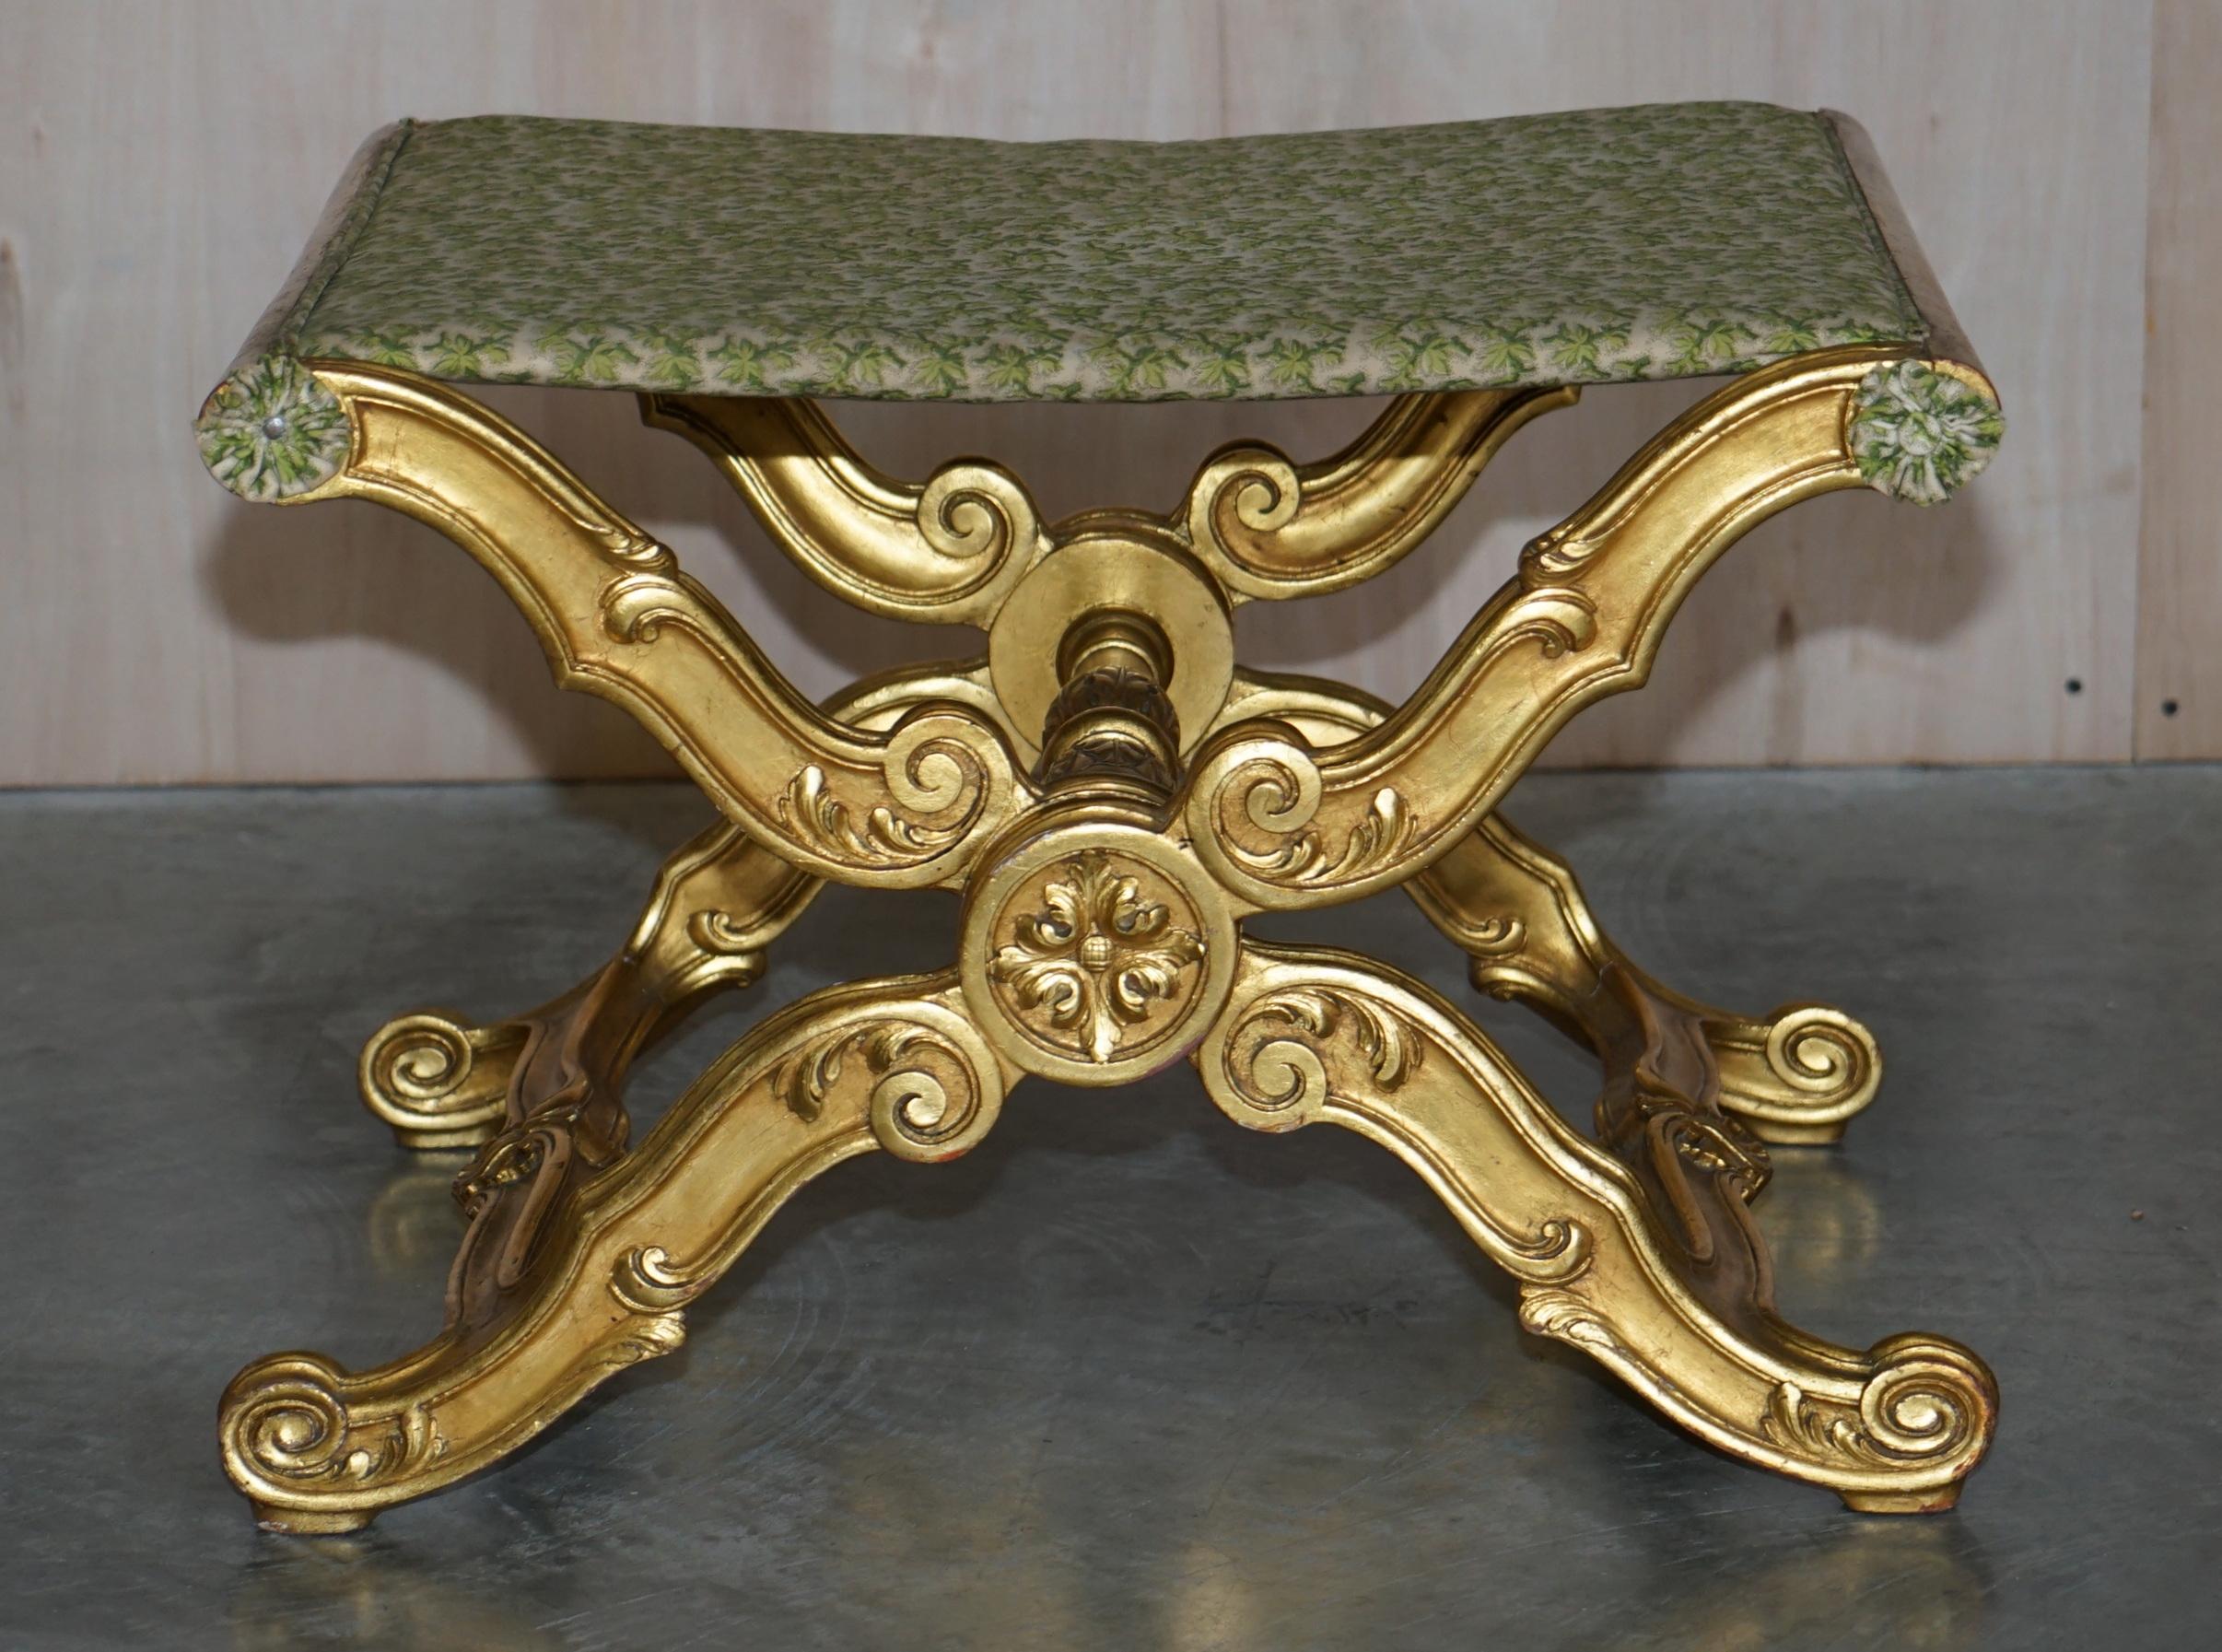 We are  delighted to offer for sale this lovely 19th century giltwood hand carved Italian x framed folding stool

A good looking well made and decorative piece, this is actually quite large for its type, the carving is exquisite quality as was the